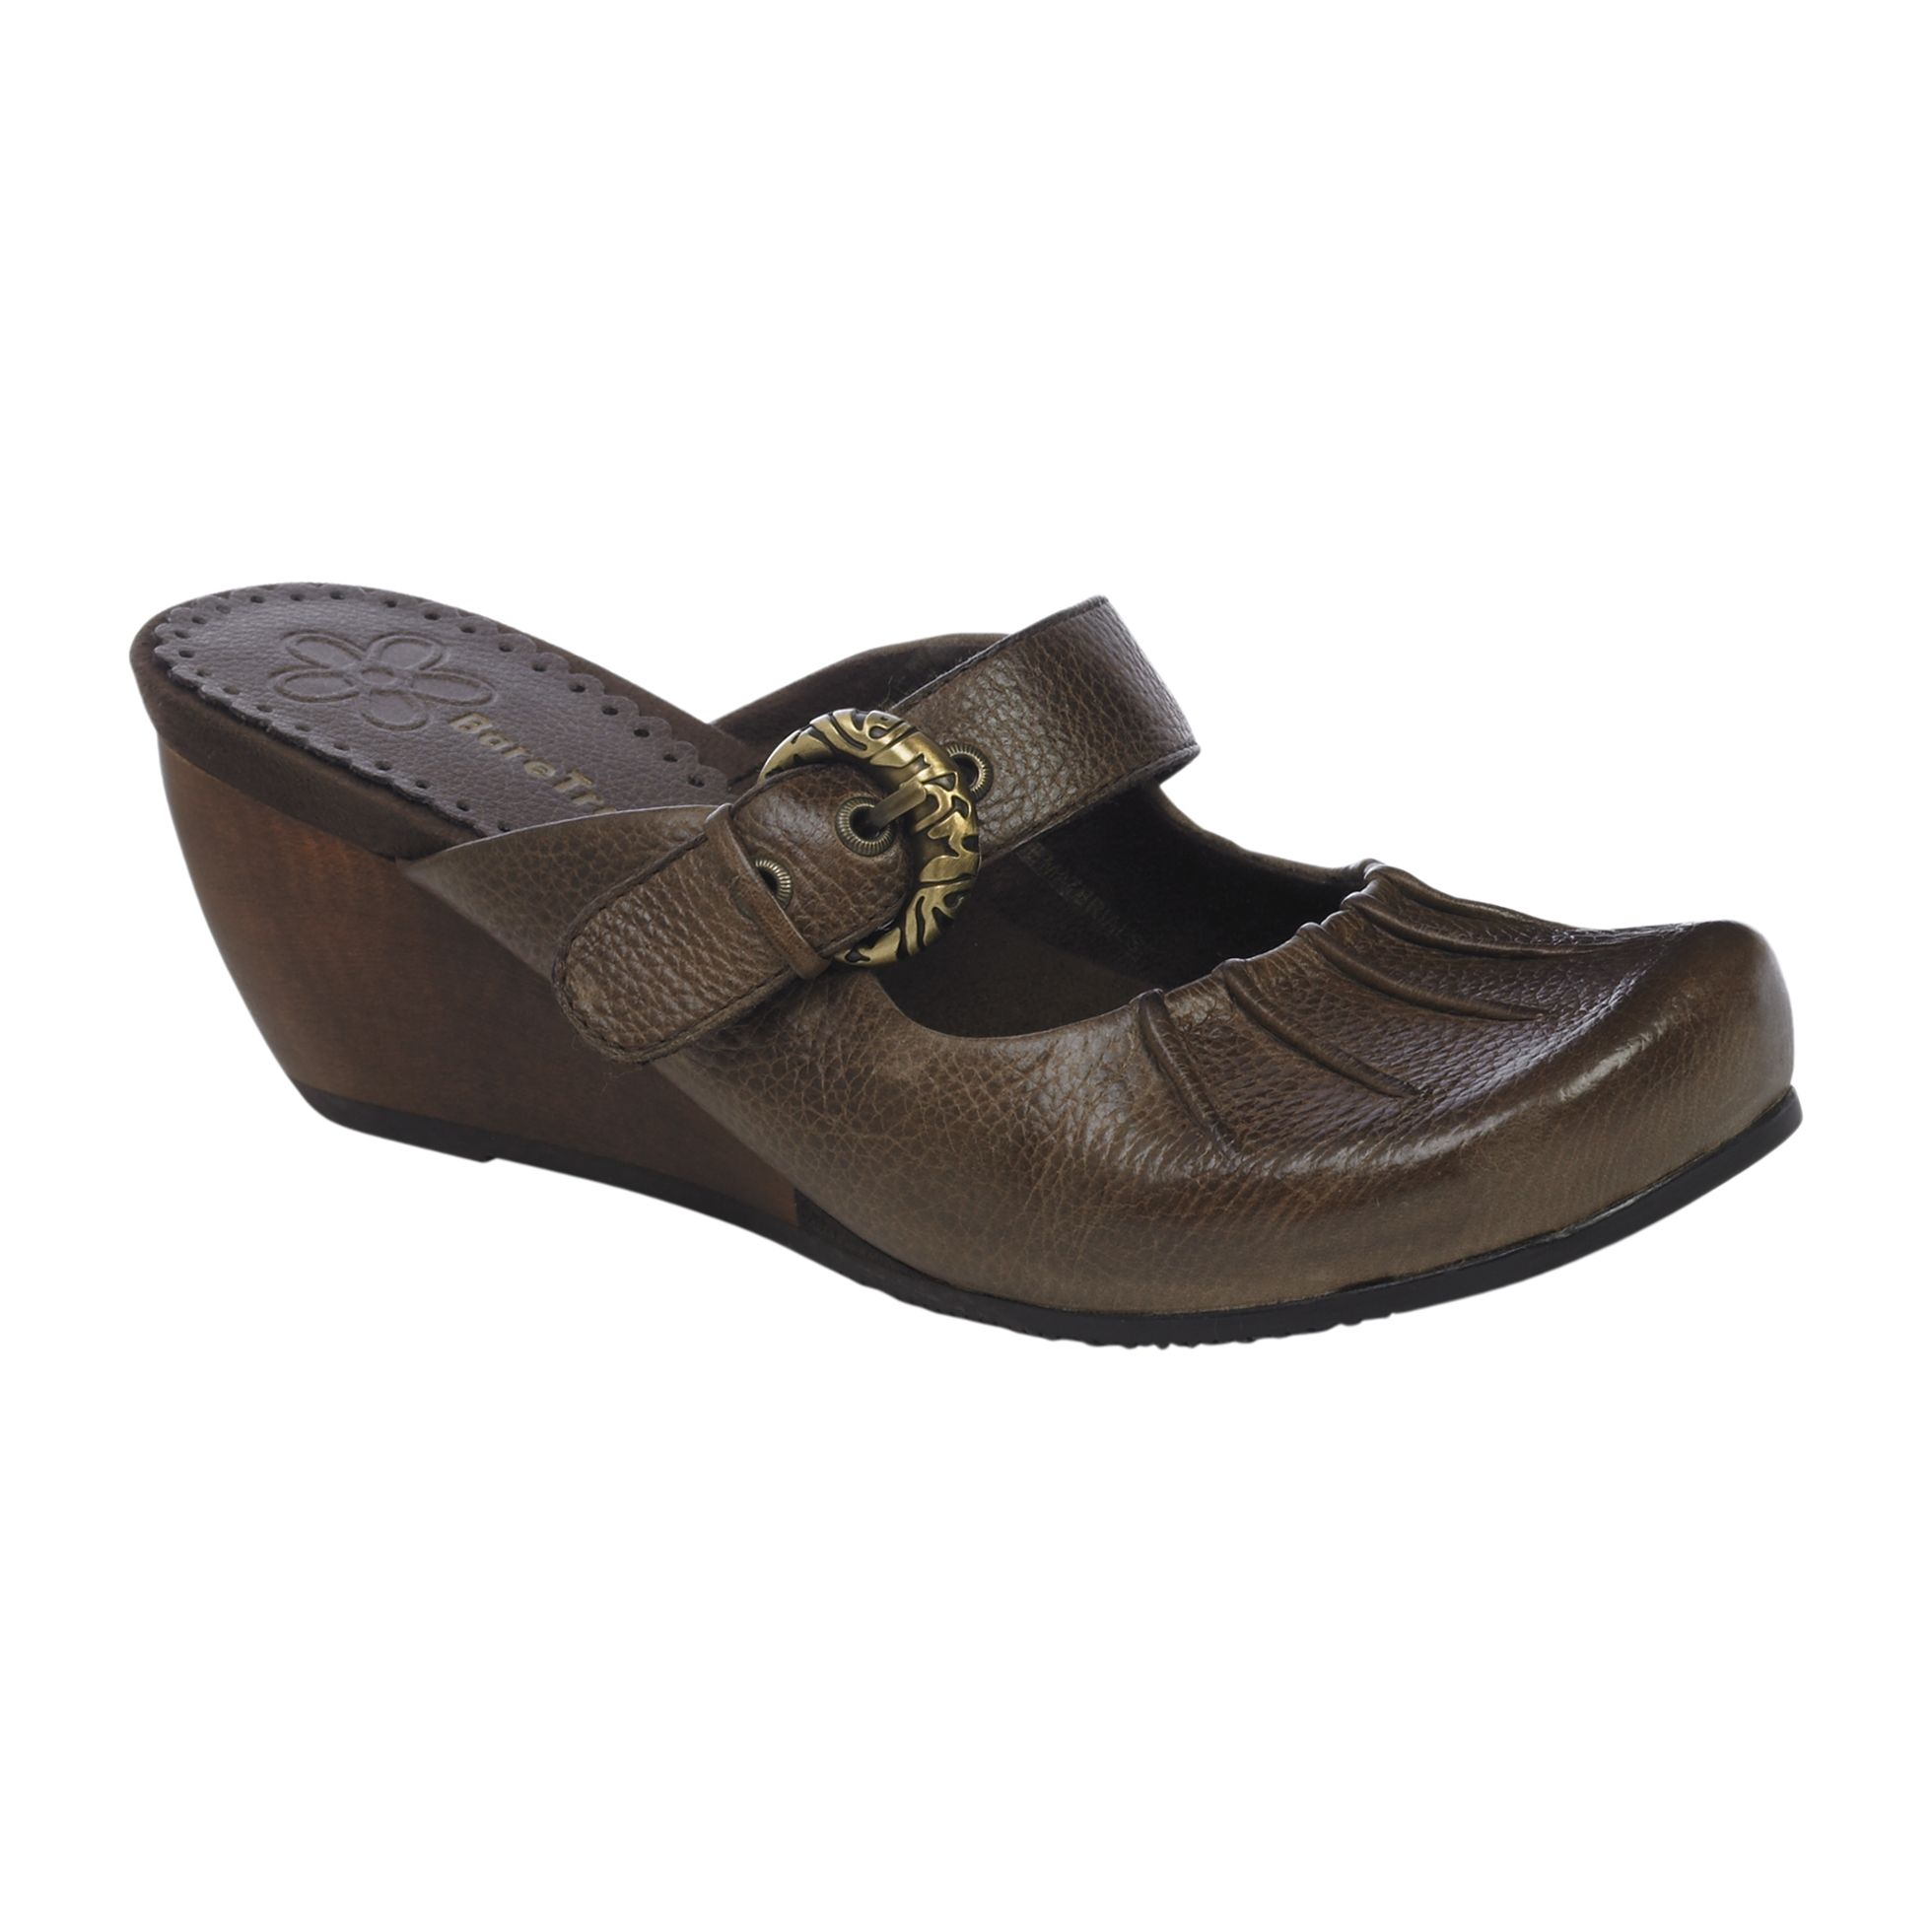 Wear Ever Women's Gayle Brown Clothing, Shoes